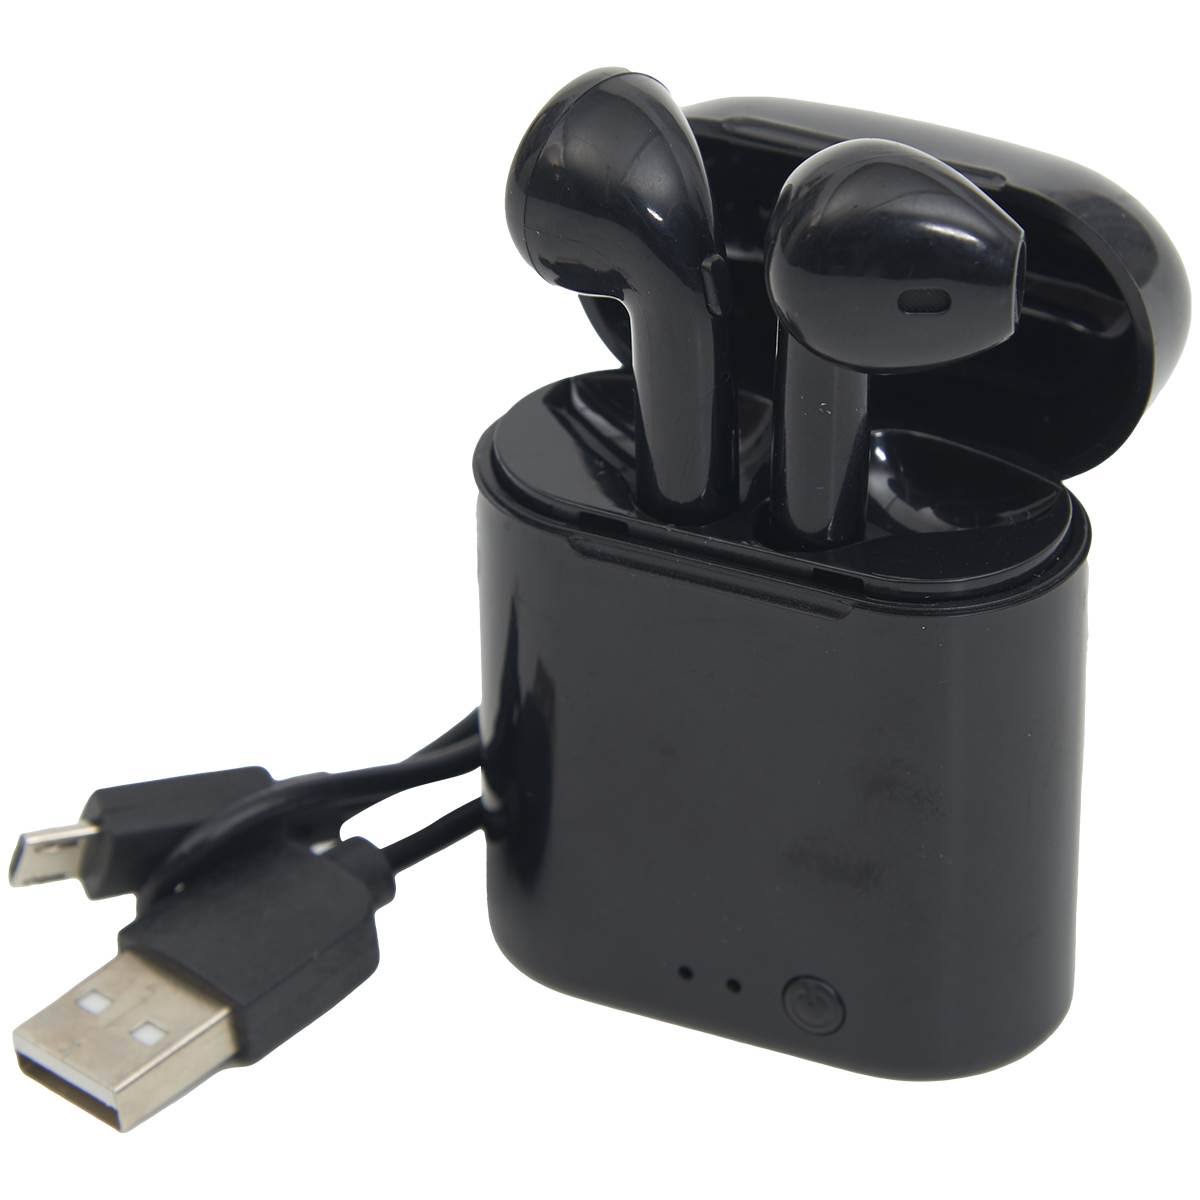 Sentry Group Sales Black Bluetooth Earbuds & Case One-Size